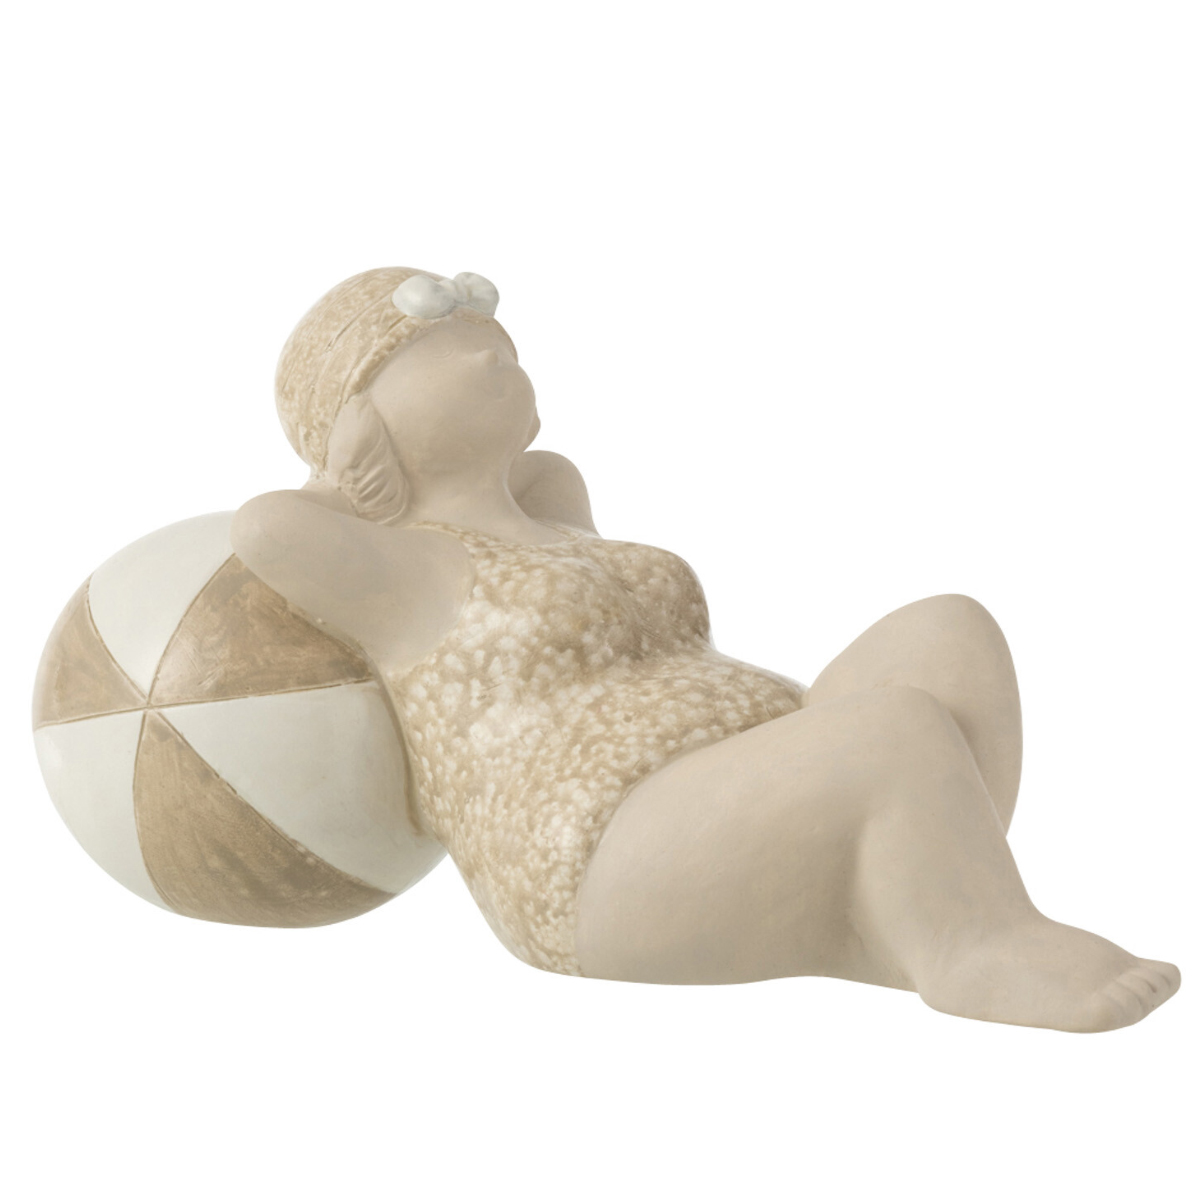 Figurine the bather with the balloon